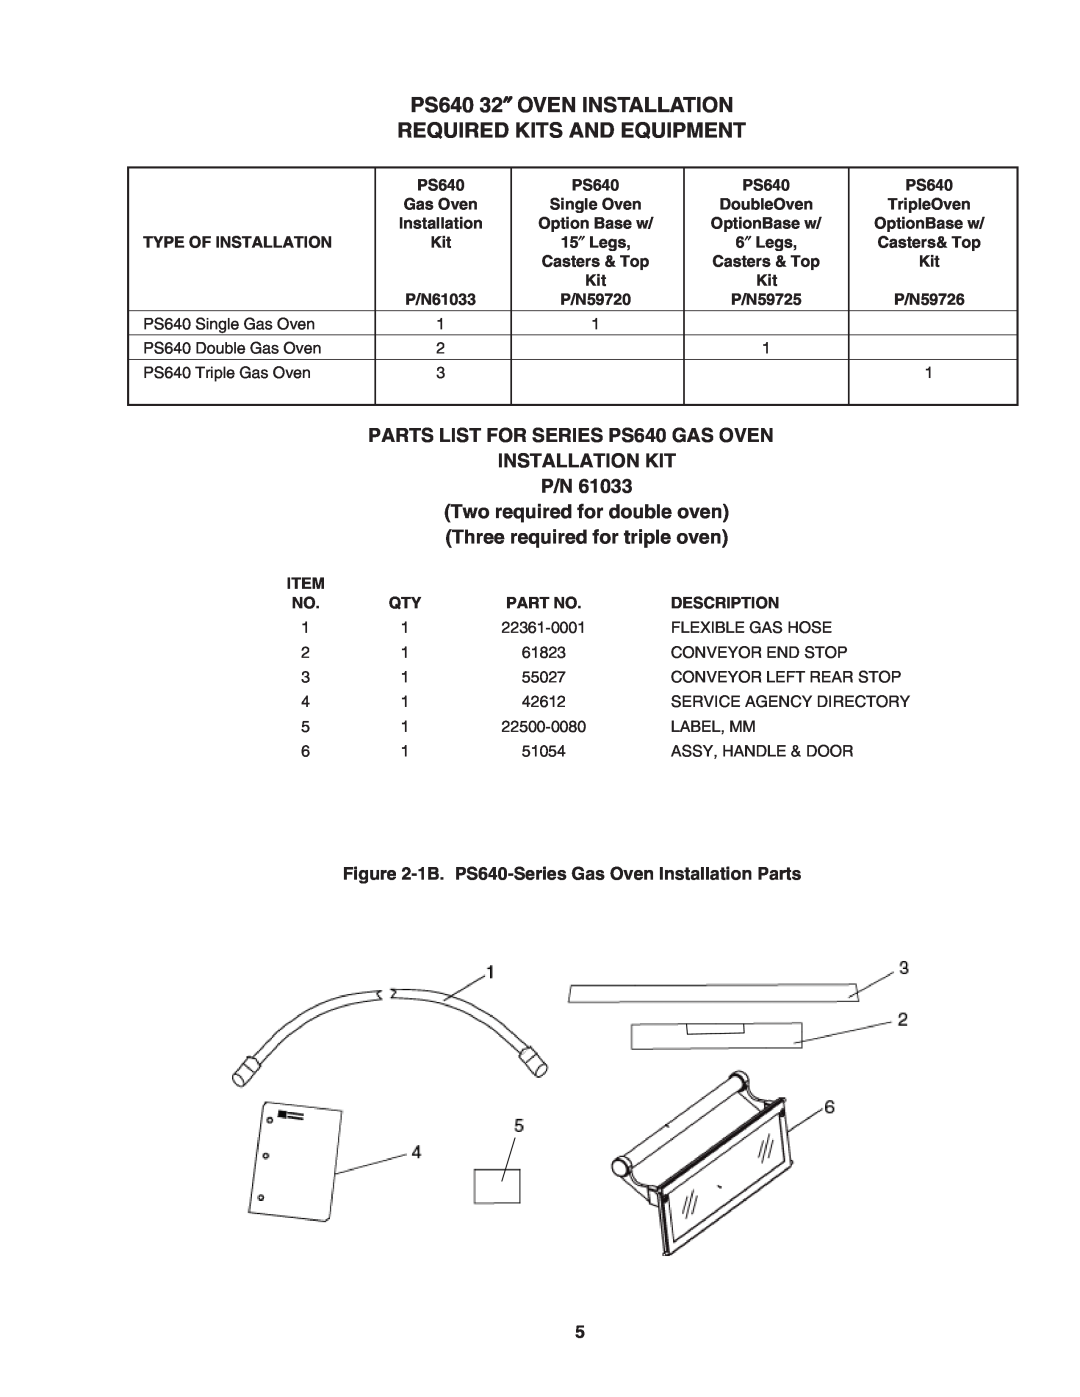 Middleby Marshall PS640 32″ OVEN INSTALLATION REQUIRED KITS AND EQUIPMENT, 1B. PS640-Series Gas Oven Installation Parts 